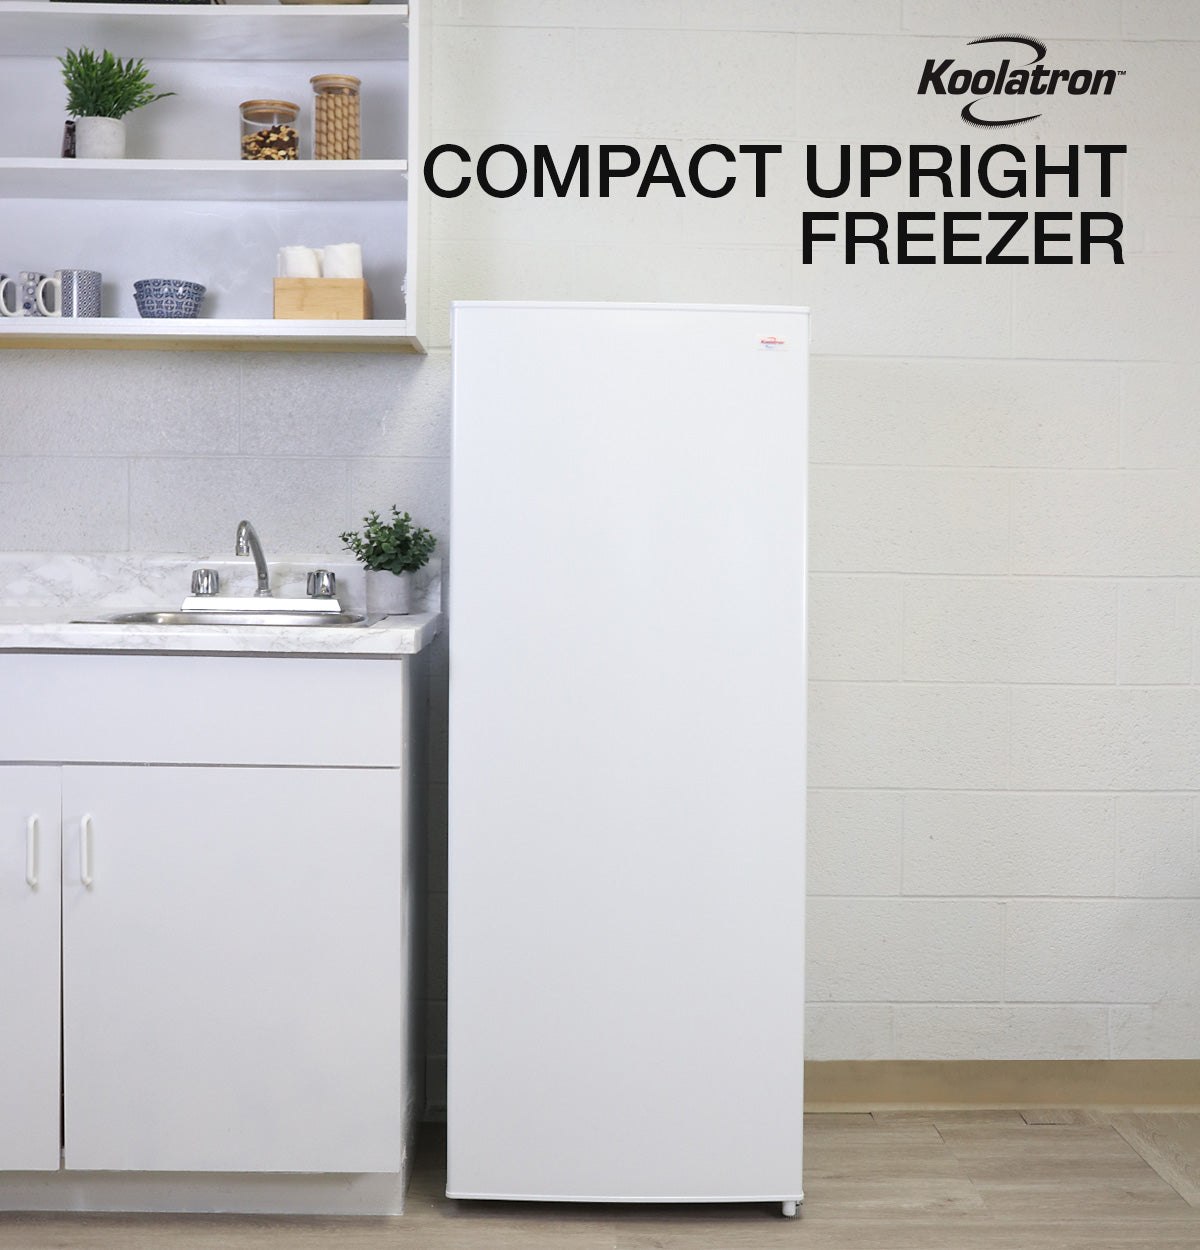 Lifestyle image of upright freezer beside a white kitchen cabinet with white marble countertop. Text above reads "Koolatron compact upright freezer"